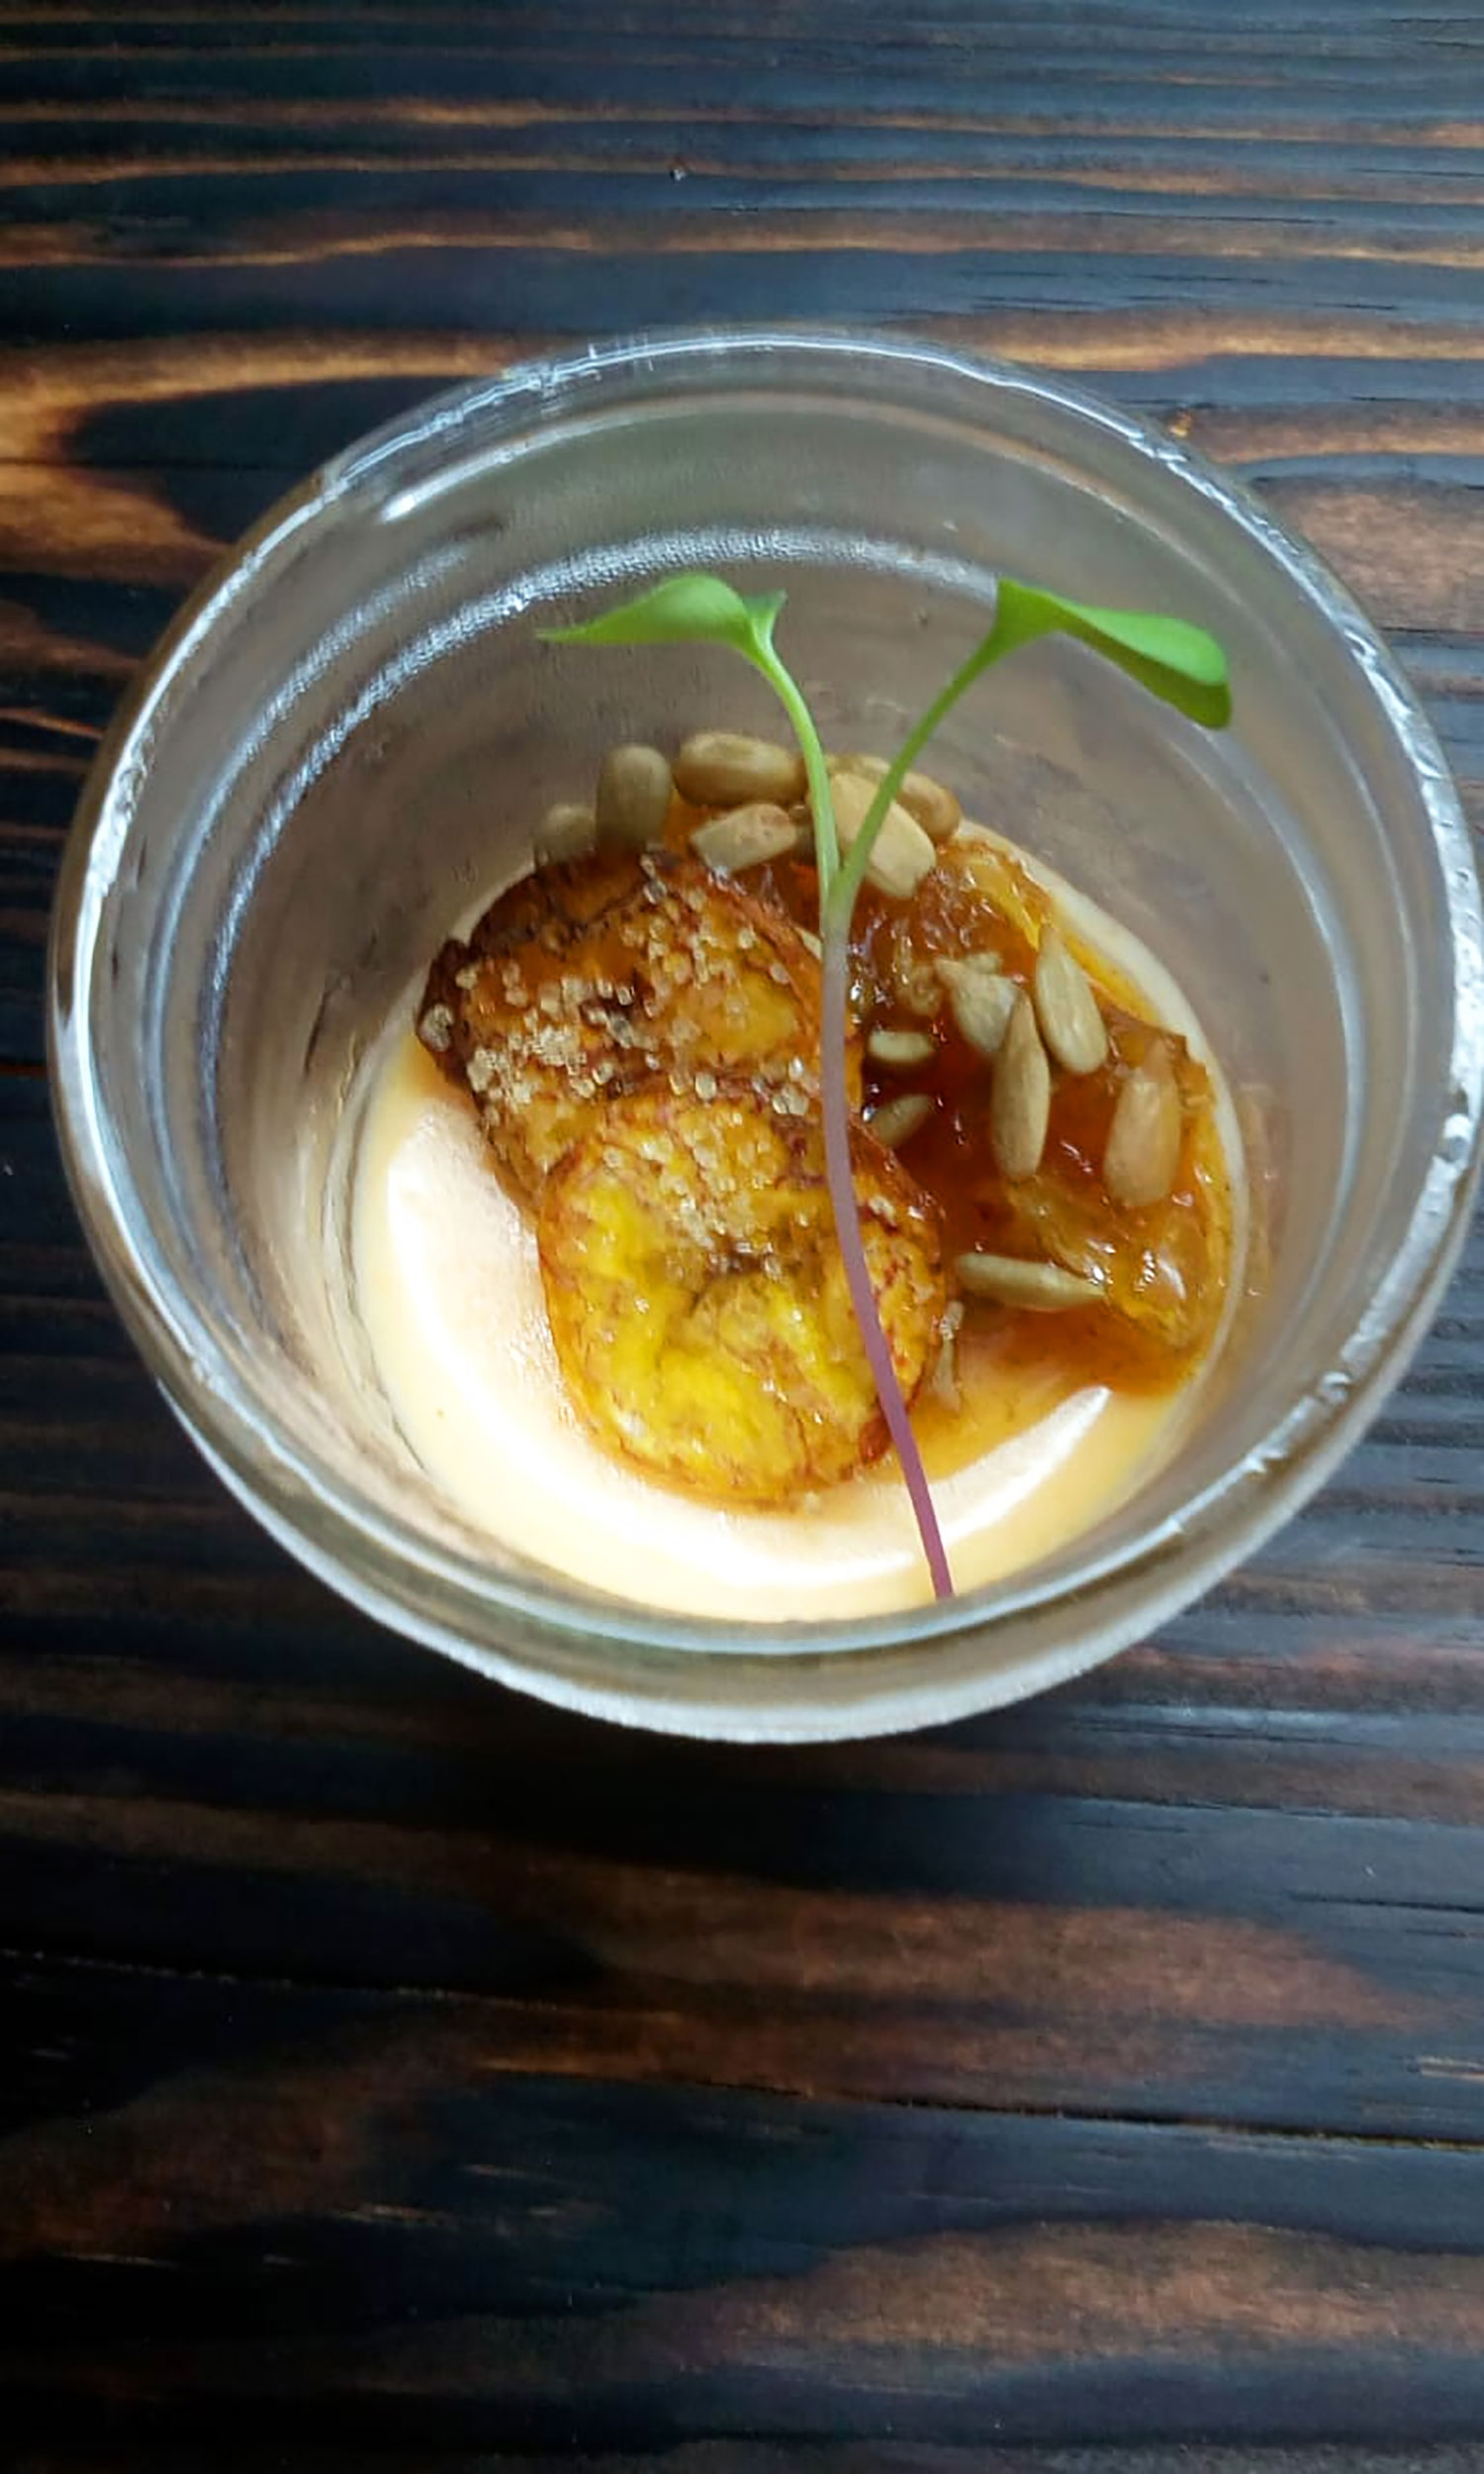 Top Your Pimento Panna Cotta With Candied Plantains And A Tart Orange Chutney